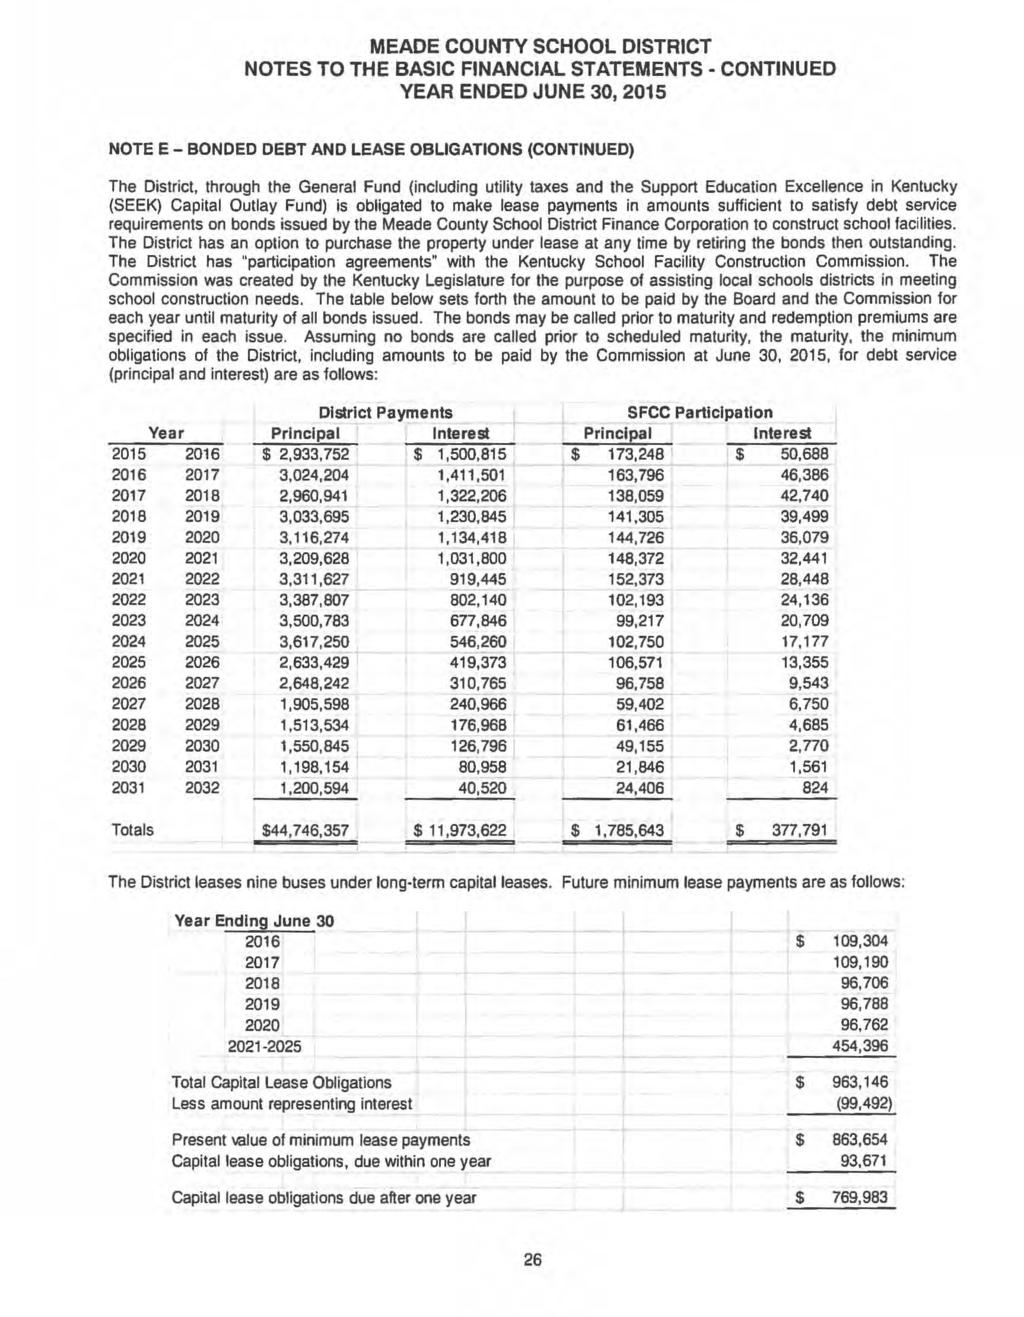 MEADE COUNTY SCHOOL DISTRICT NOTES TO THE BASIC FINANCIAL STATEMENTS - CONTINUED YEAR ENDED JUNE 30, 2015 NOTE E - BONDED DEBT AND LEASE OBLIGATIONS (CONTINUED) The District, through the General Fund